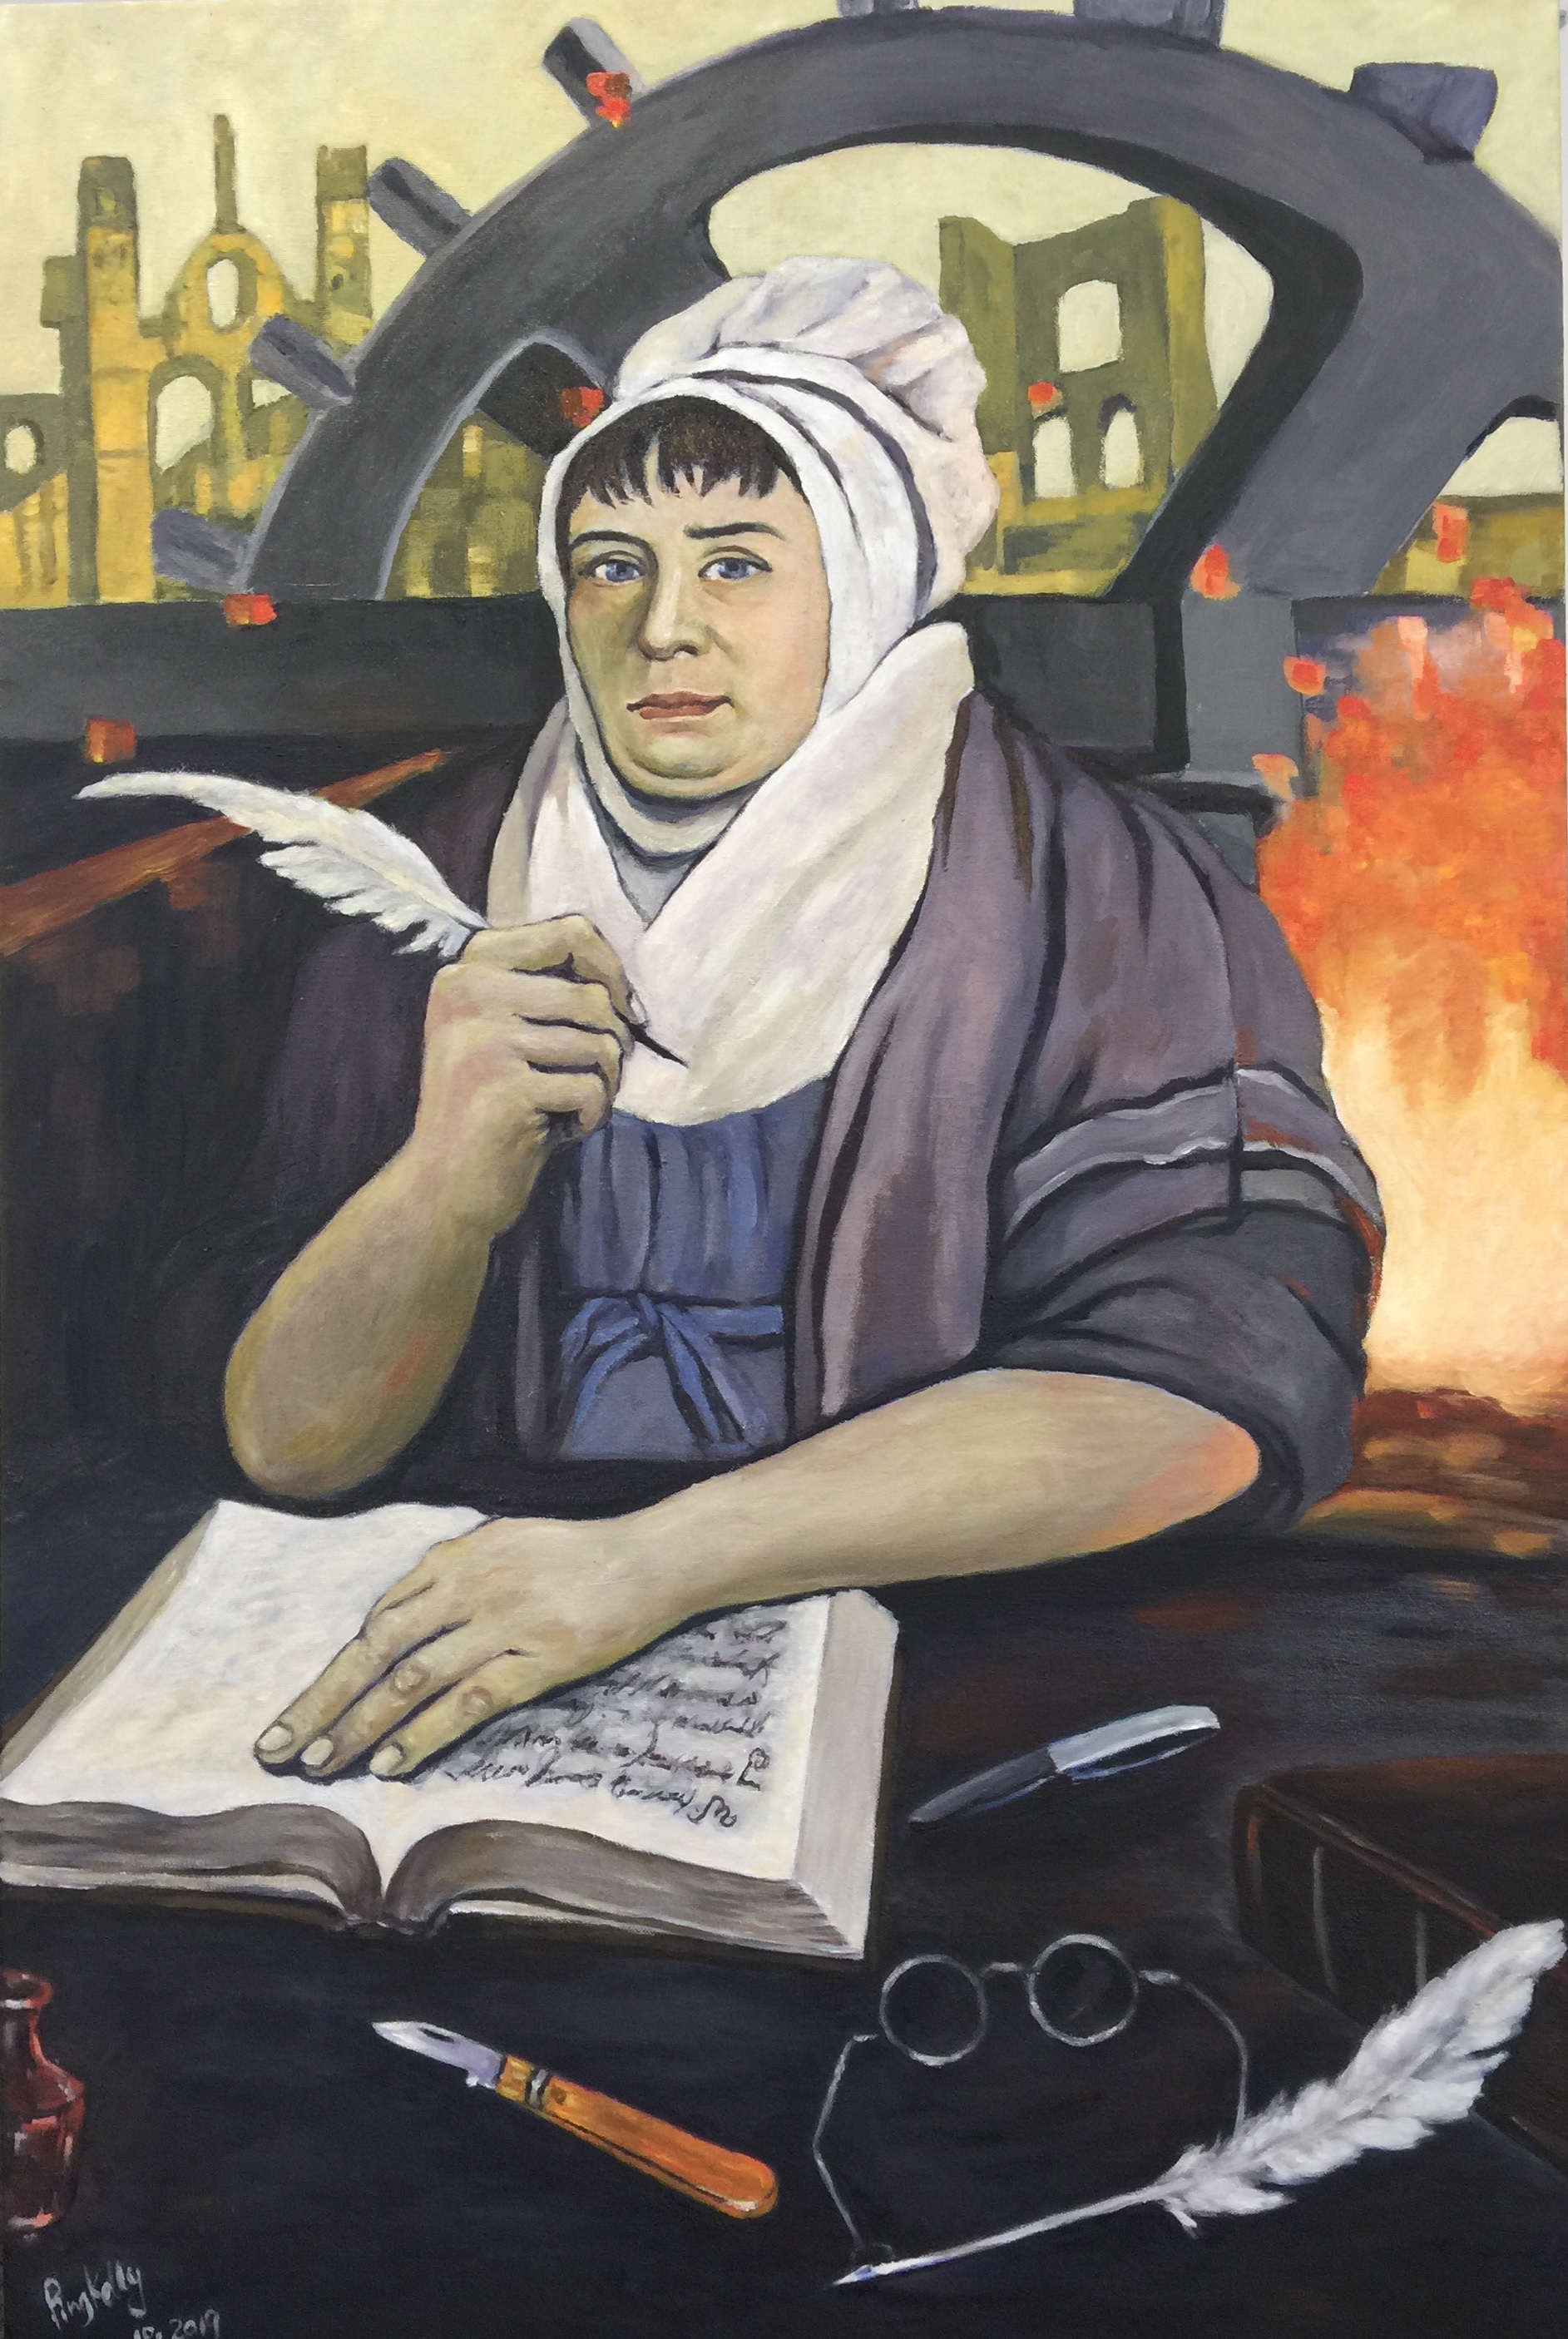 Betty was commissioned by Leeds Industrial Museum for the 'Leeds to Innovation' exhibition at Armley Mills in Leeds. It responds to the only known portrait of Elizabeth Beecroft, a local woman whose intervention rescued the ailing Kirkstall Forge